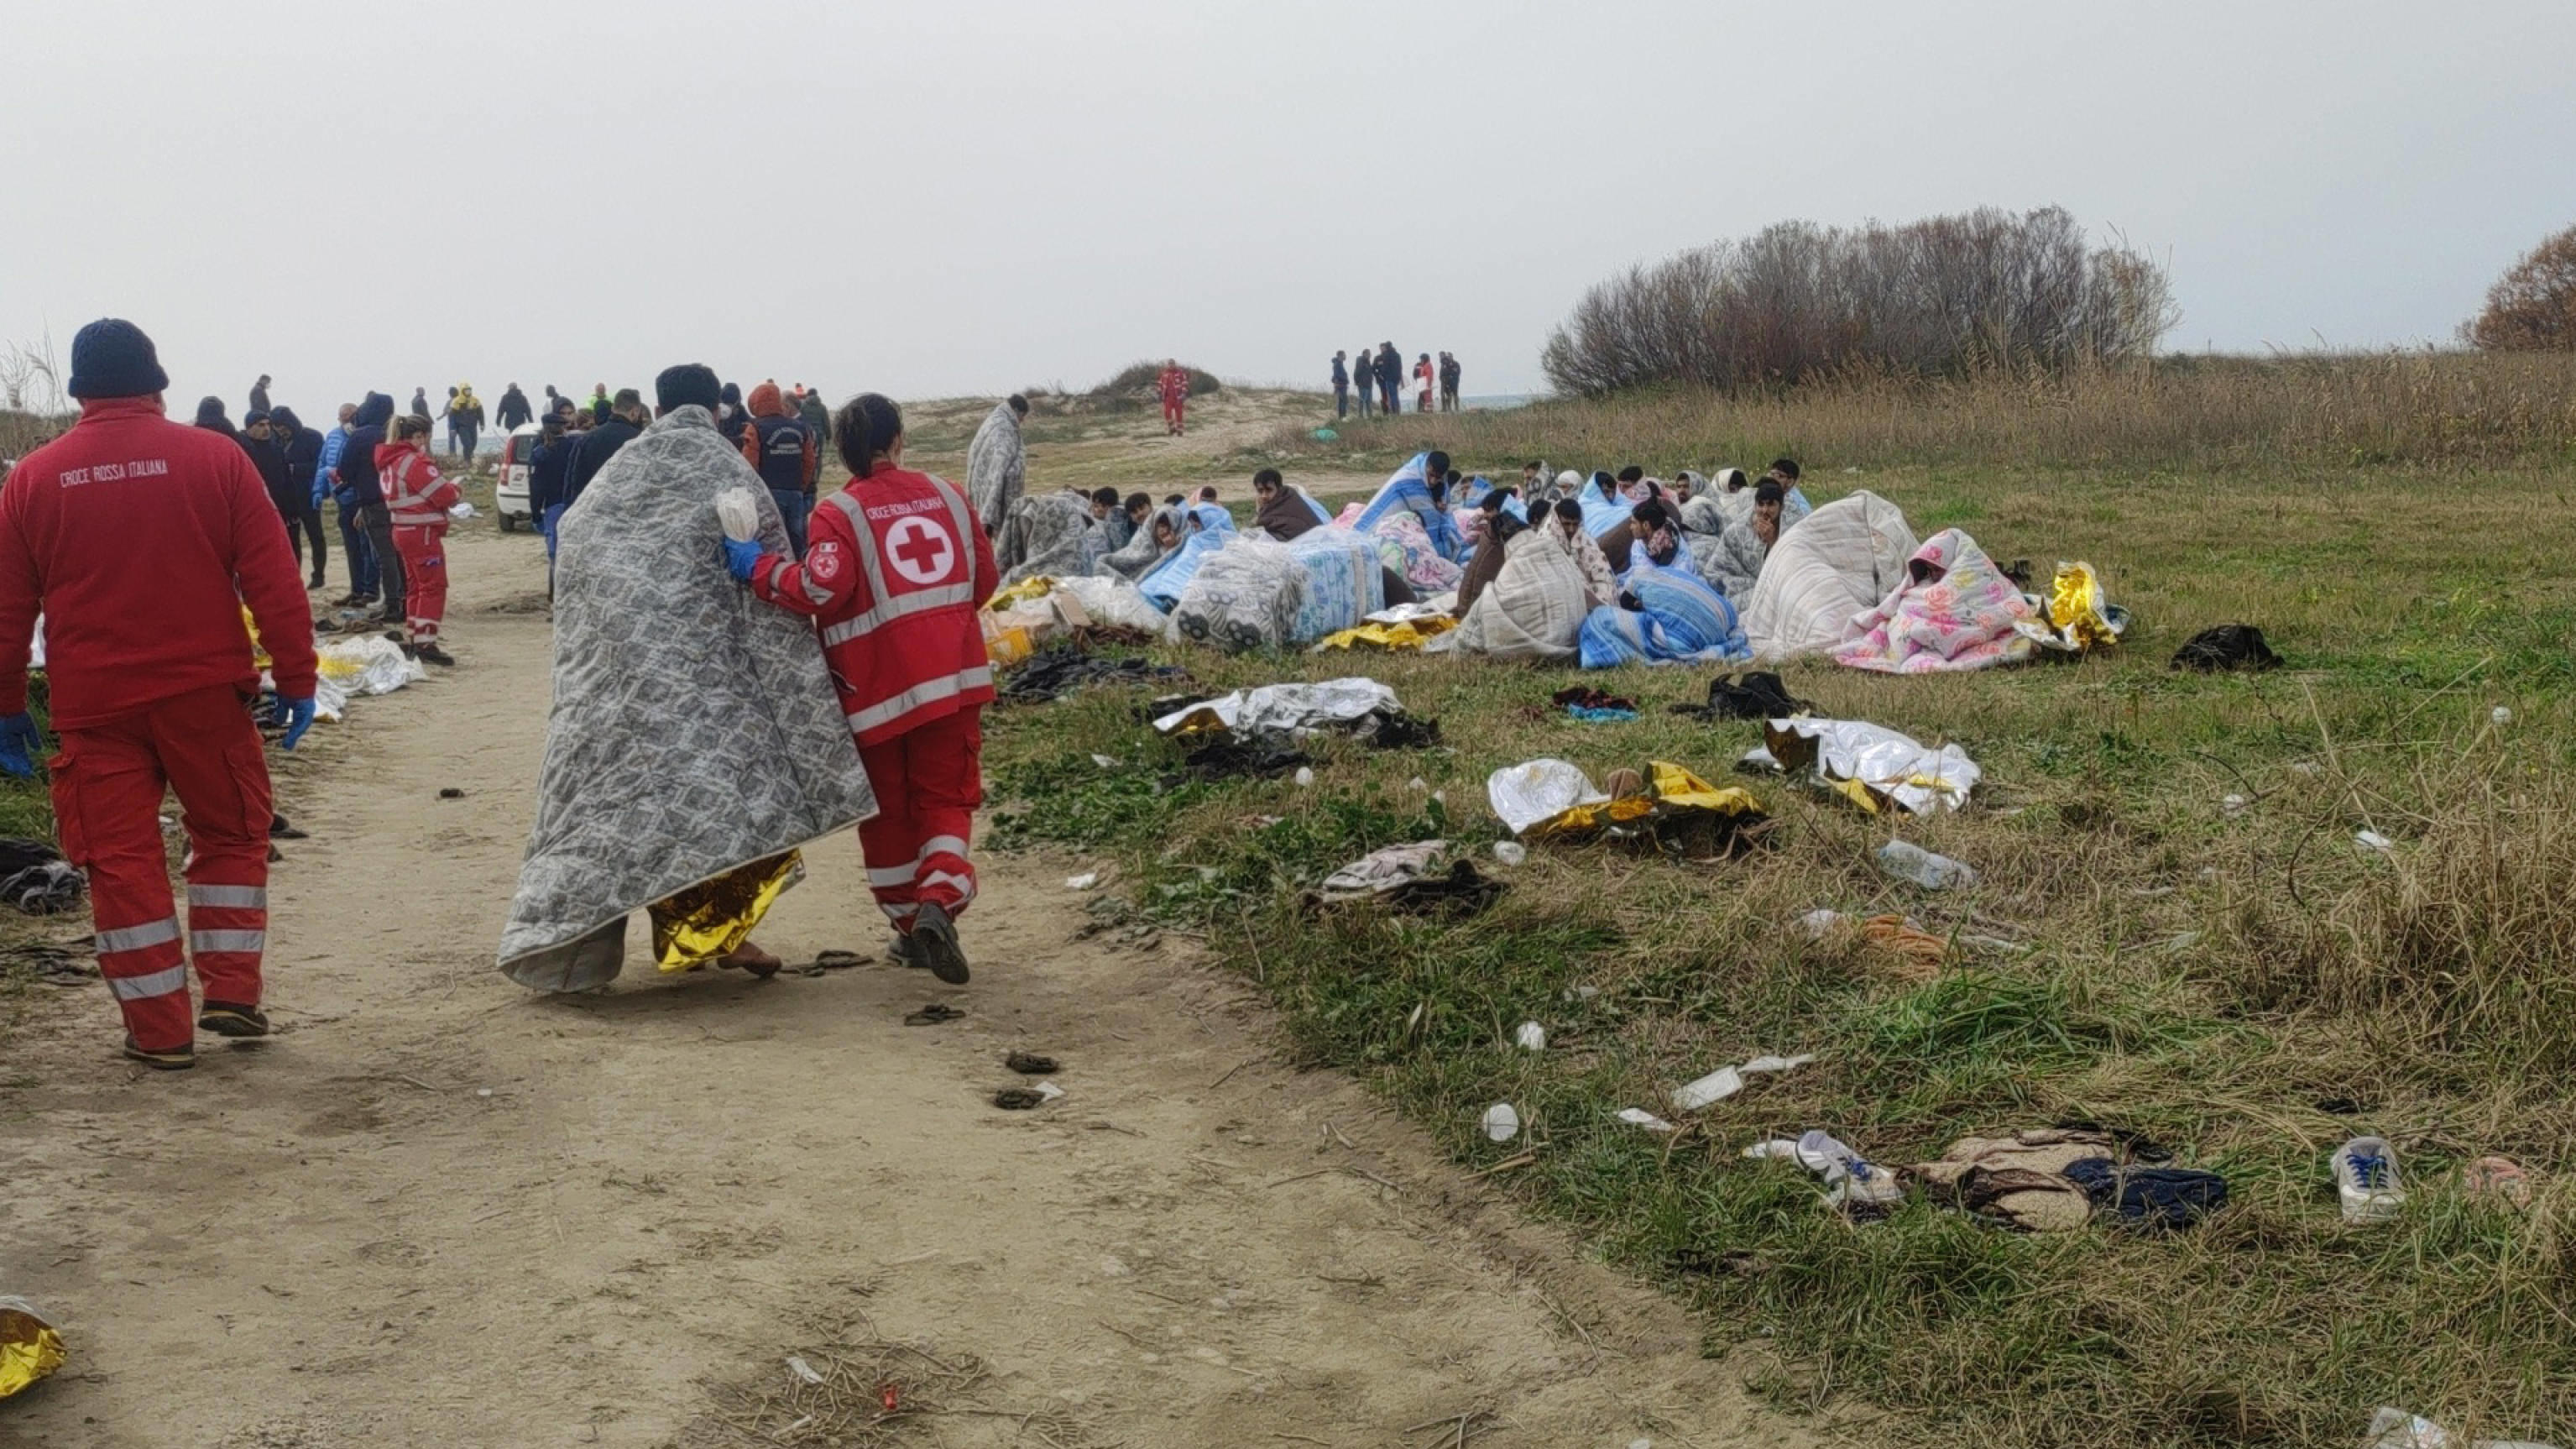 February 26, 2023, CUTRO: Red Cross personnel stand next to survivors after they washed ashore following a shipwreck, at a beach near Cutro, Crotone province, southern Italy, 26 February 2023. Italian authorities recovered at least 40 bodies on the b